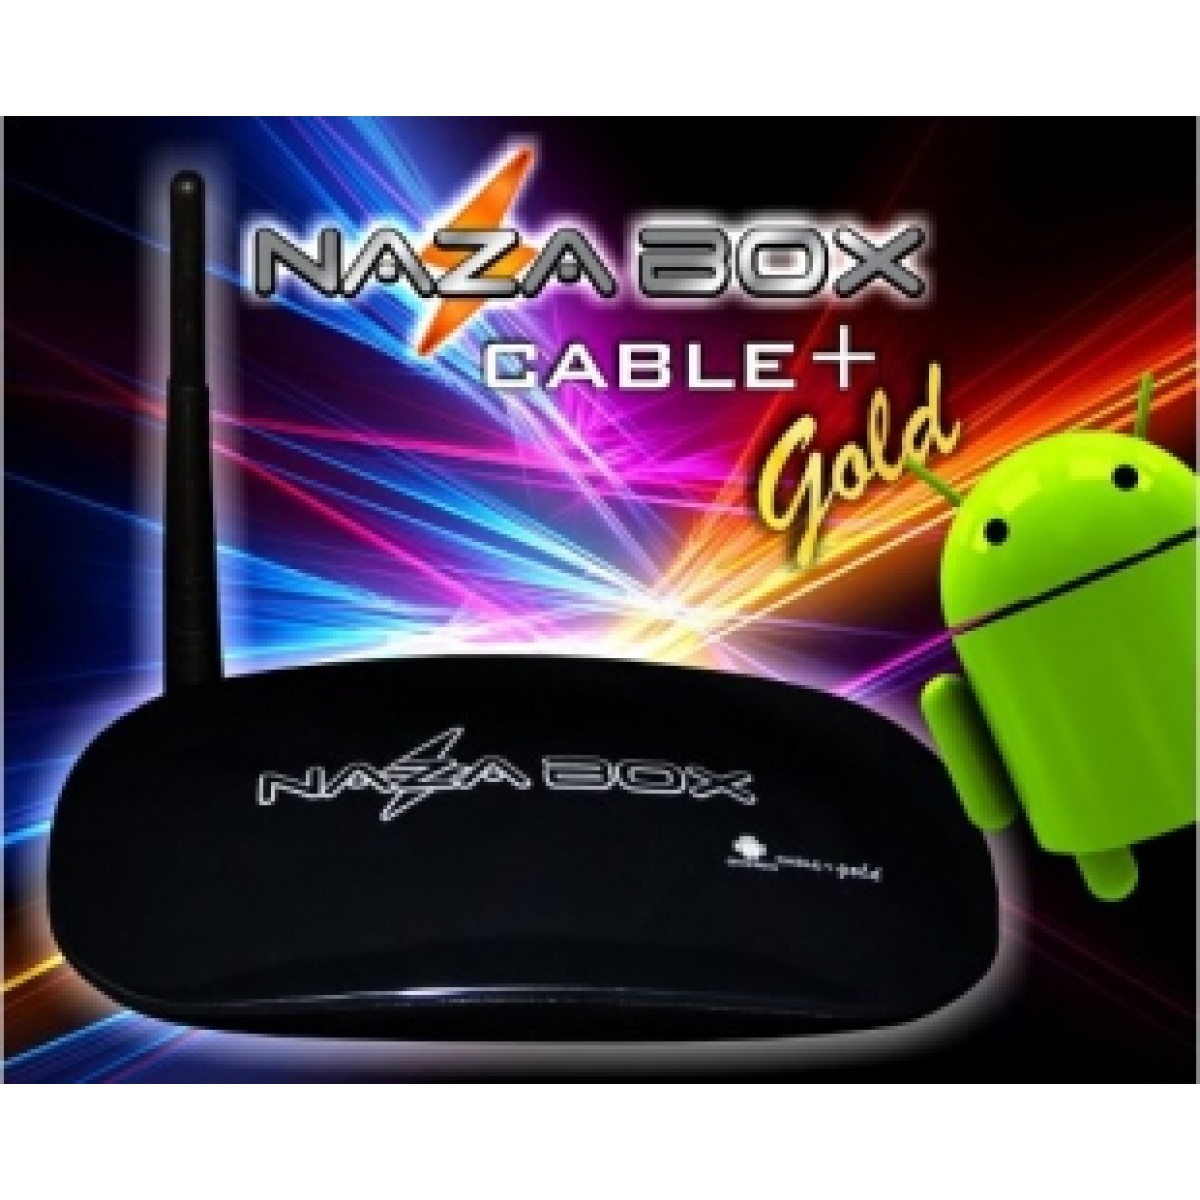 NazaBox Cable + Gold